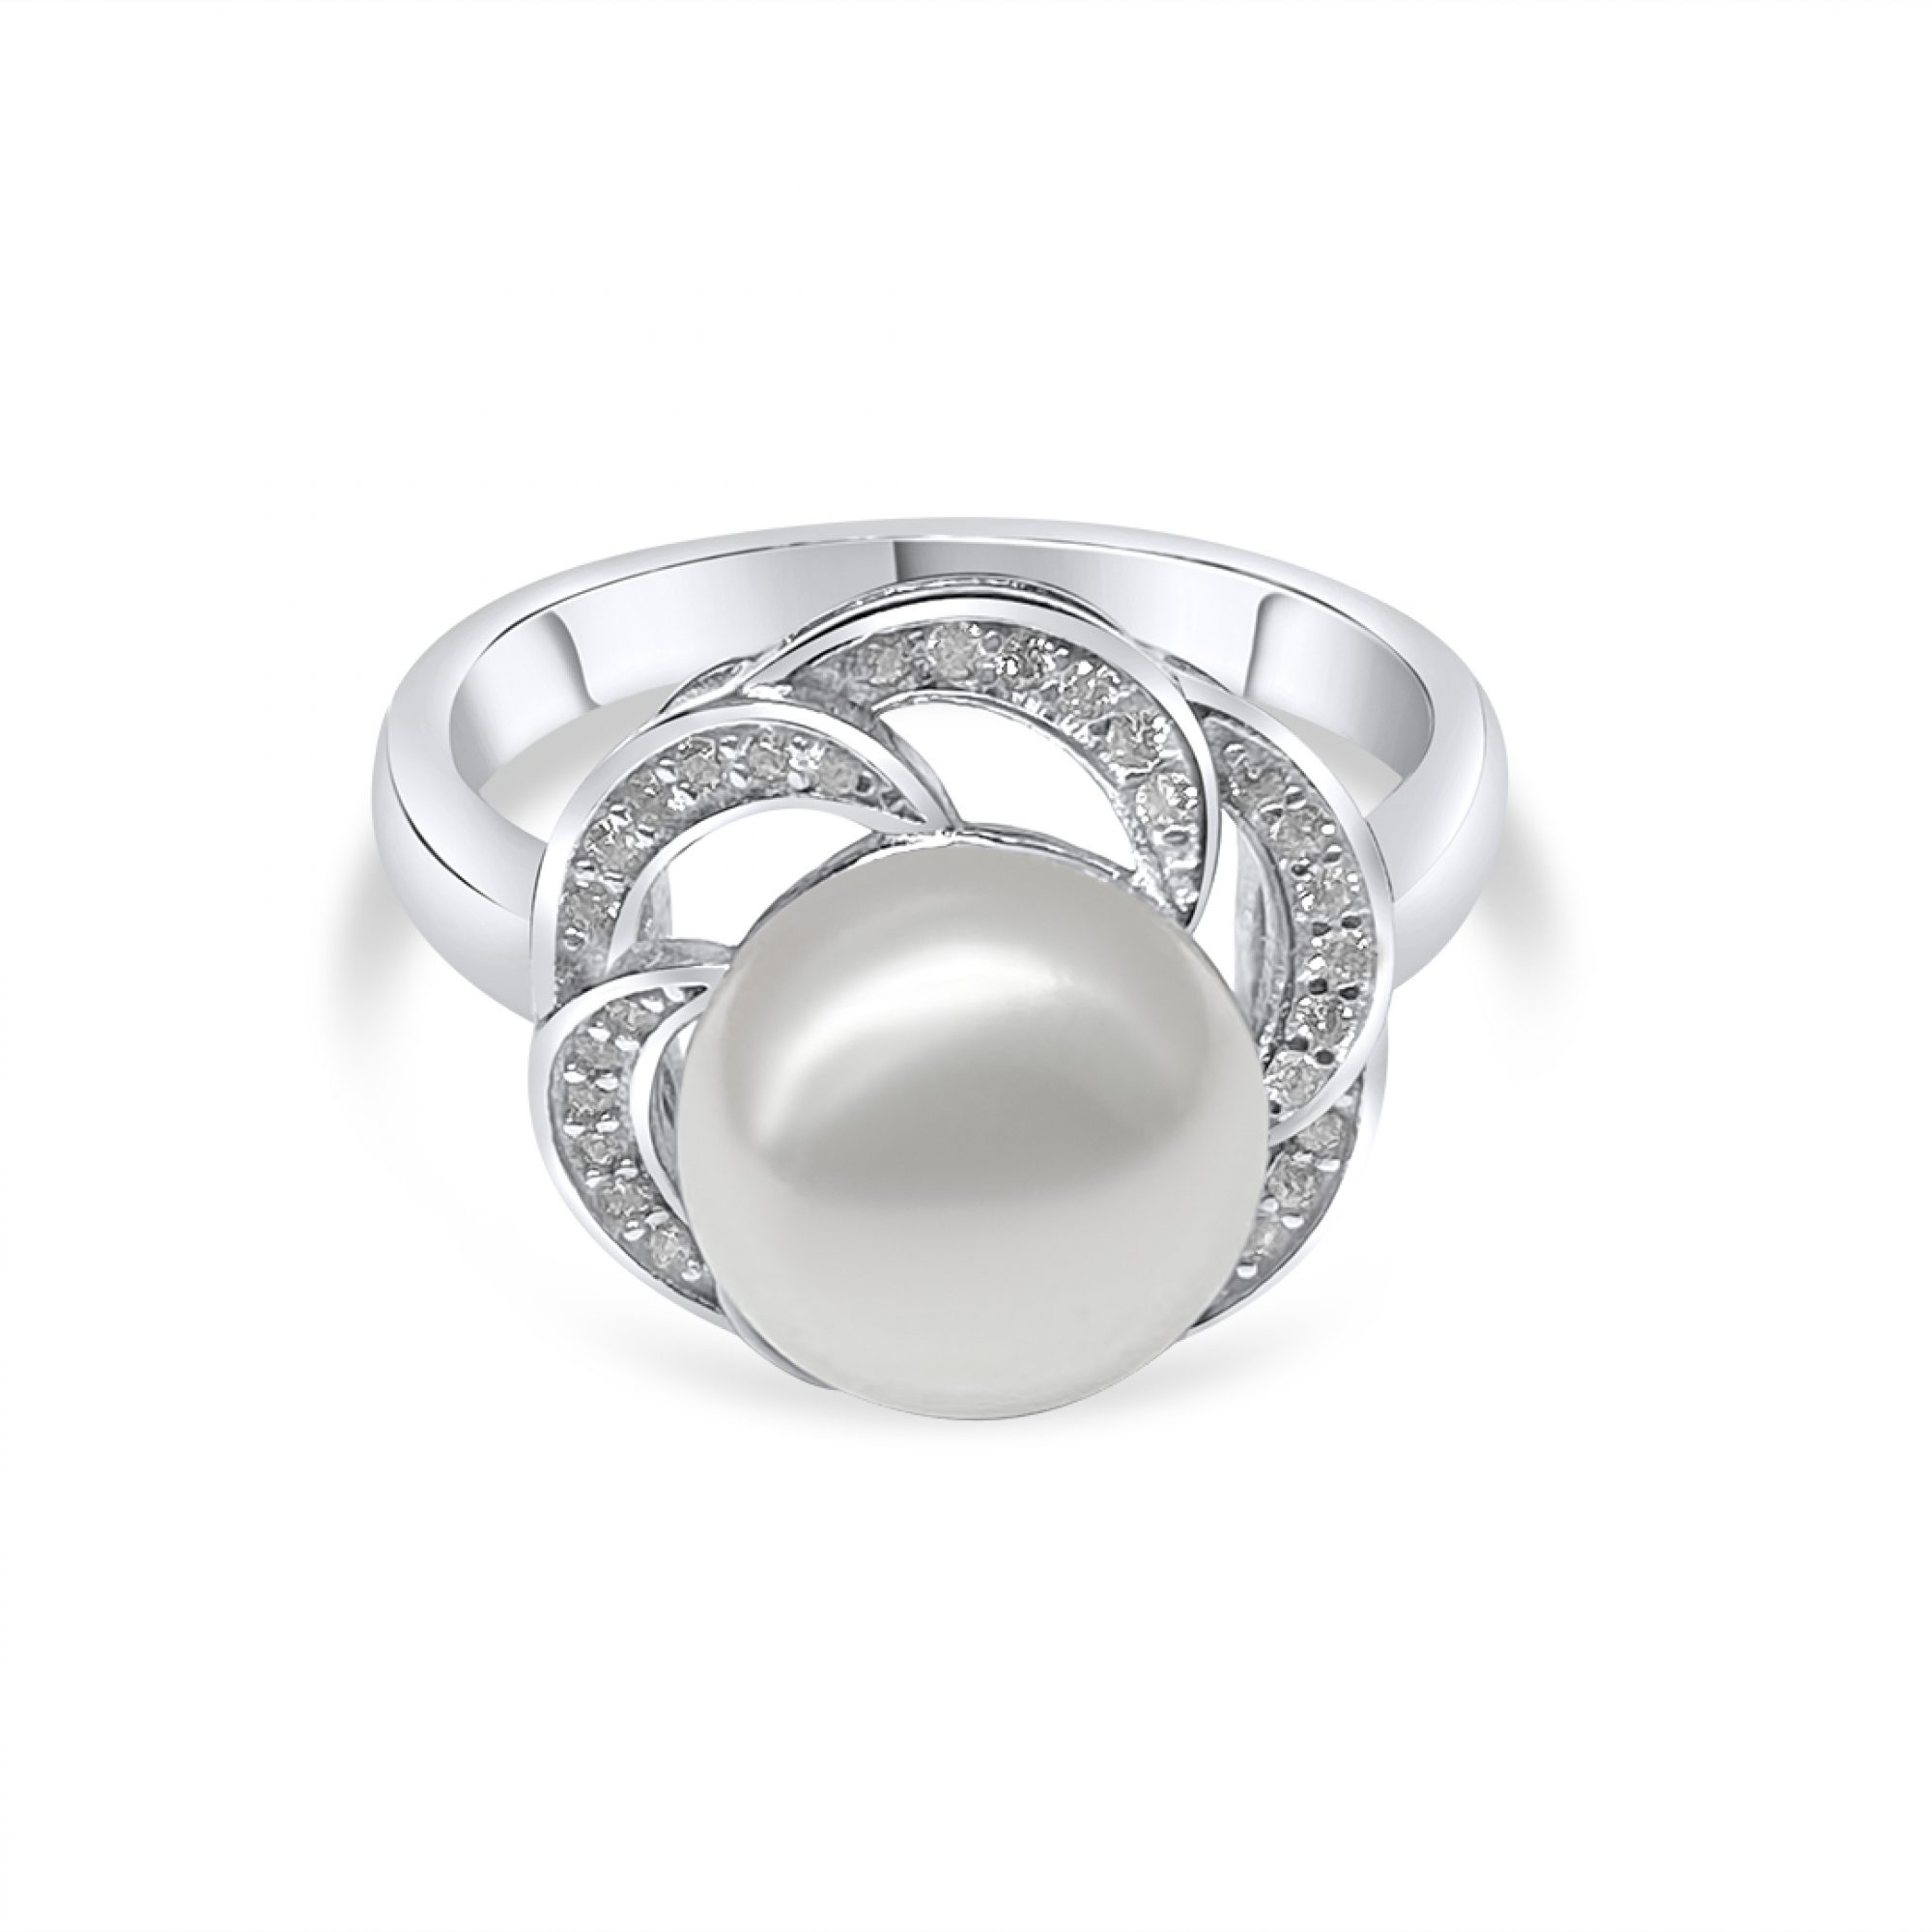 Ring with pearl and zircon stones